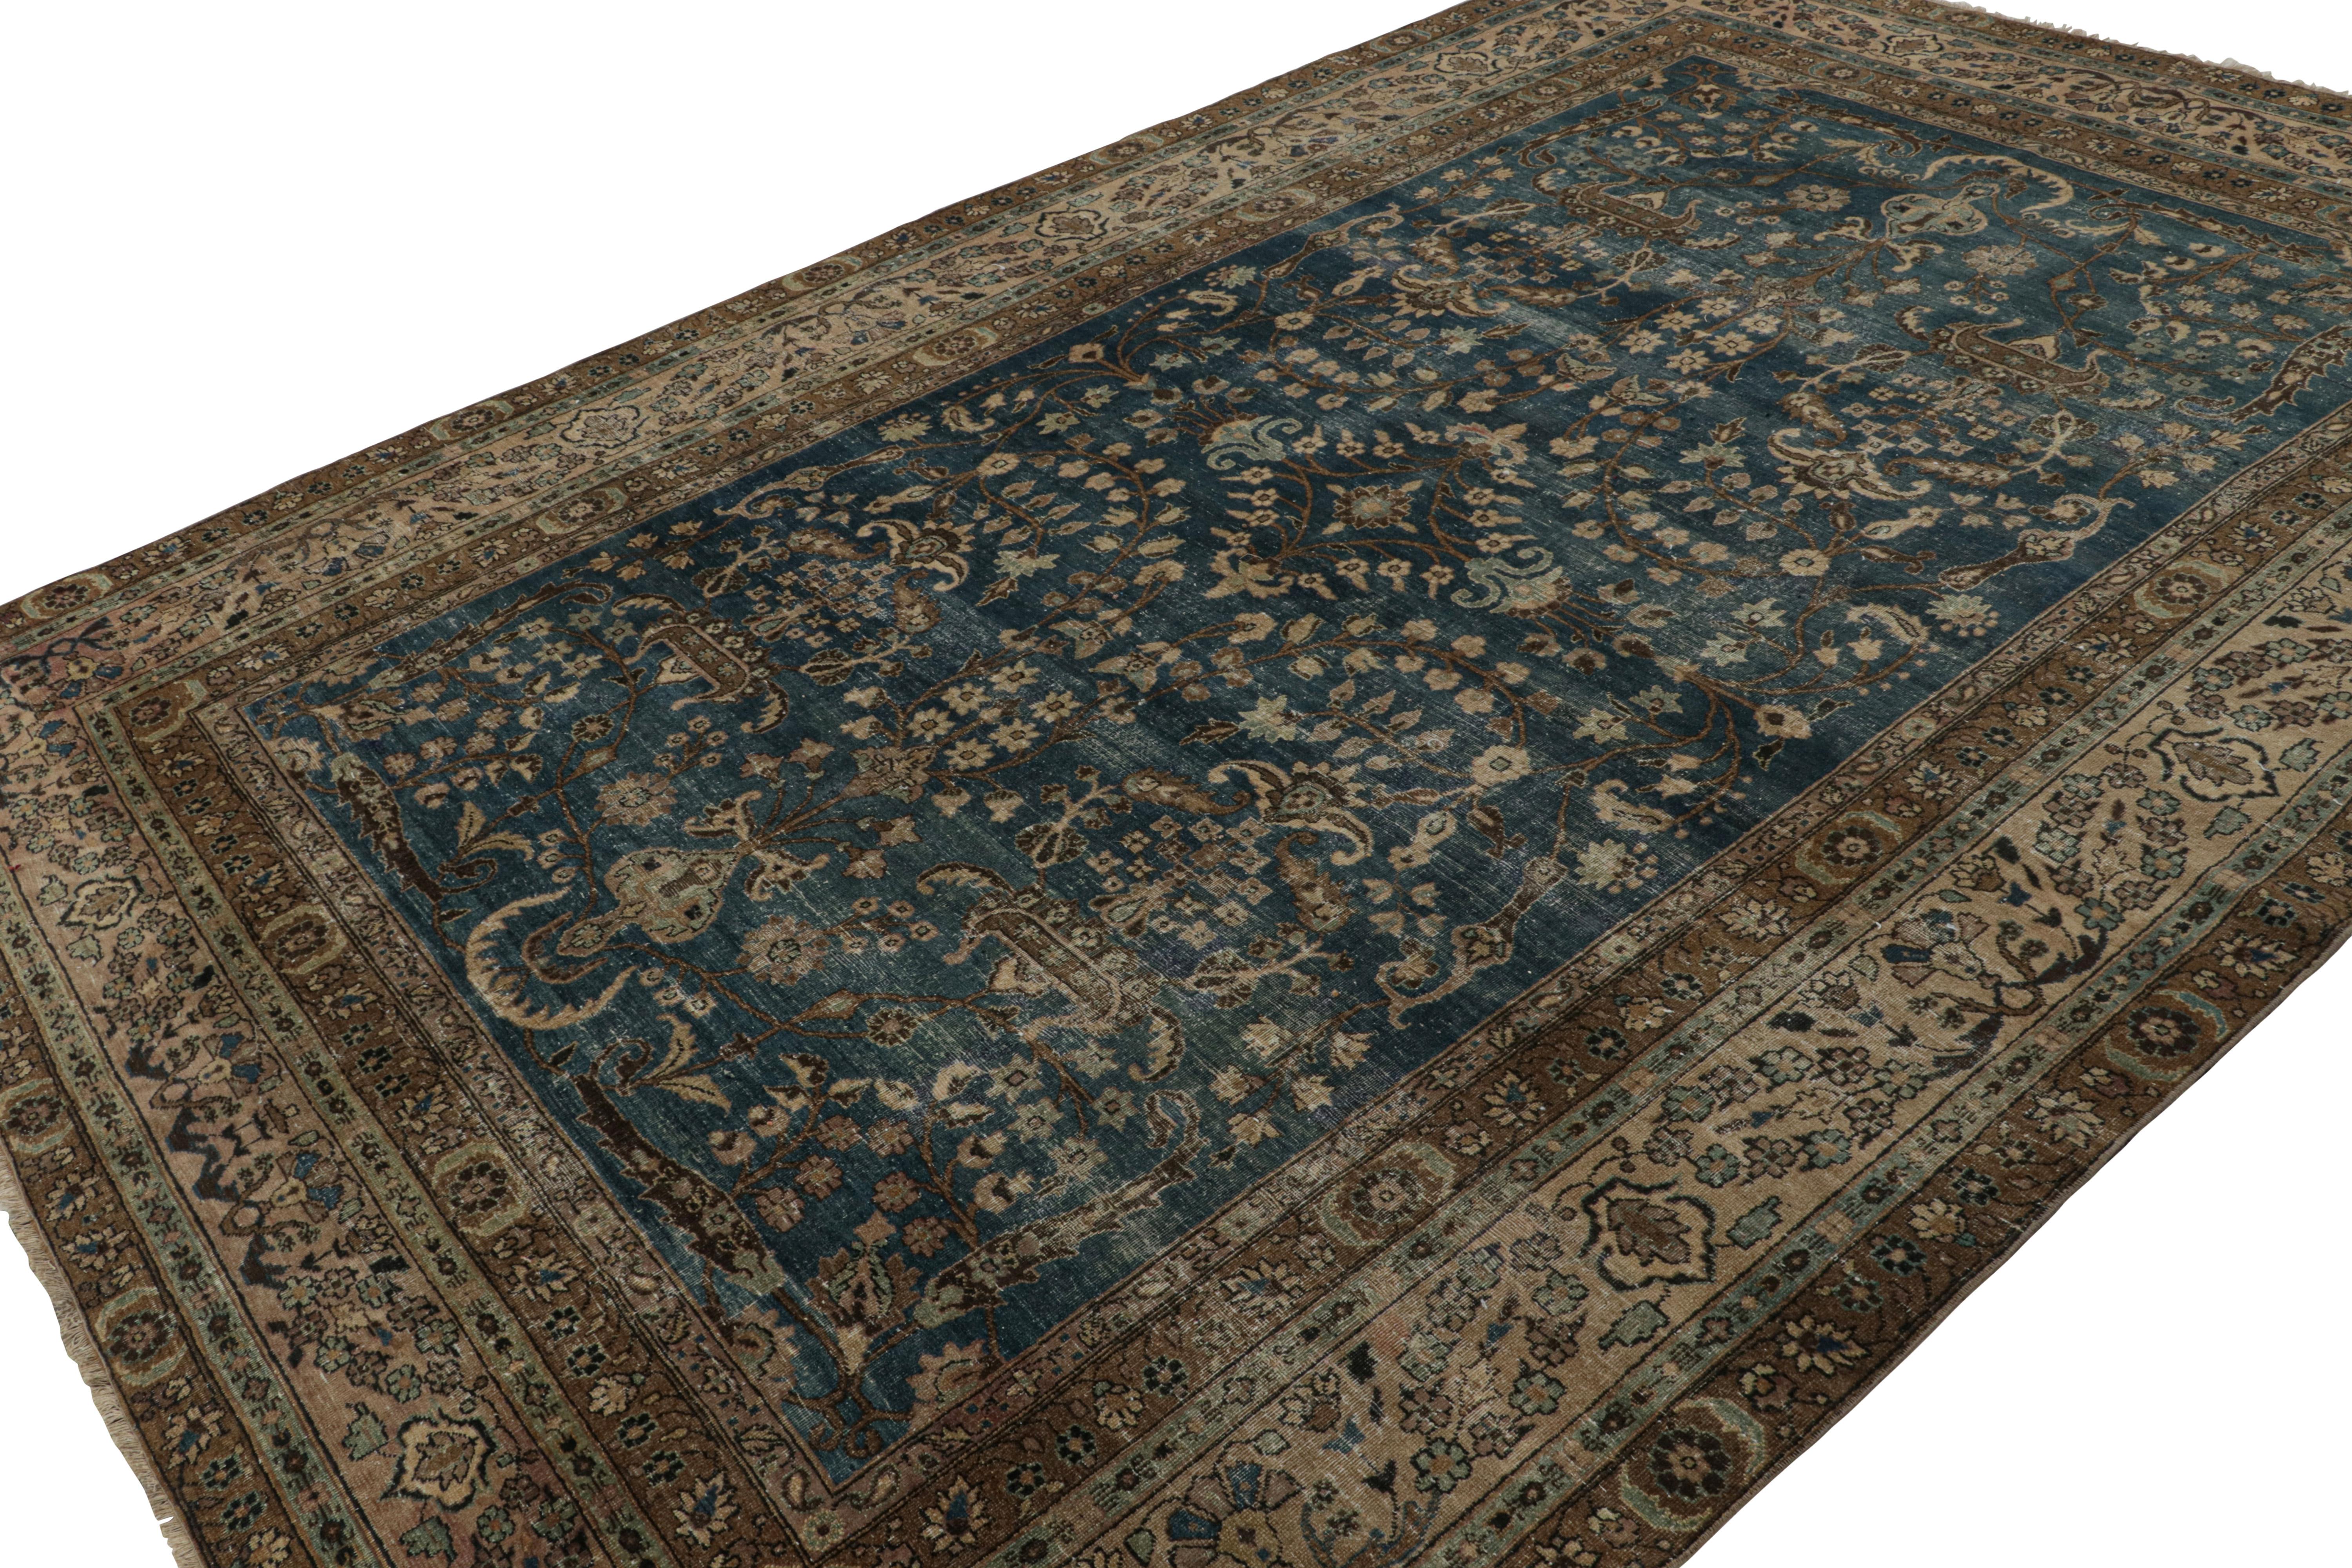 Hand-knotted in wool, this 8x12 antique Persian Doroksh rug, circa 1920-1930, has a subtle European sensibility to its floral patterns, almost like that of a Kashan and other provinces, making it all the more rare for a Doroksh as a subversive,